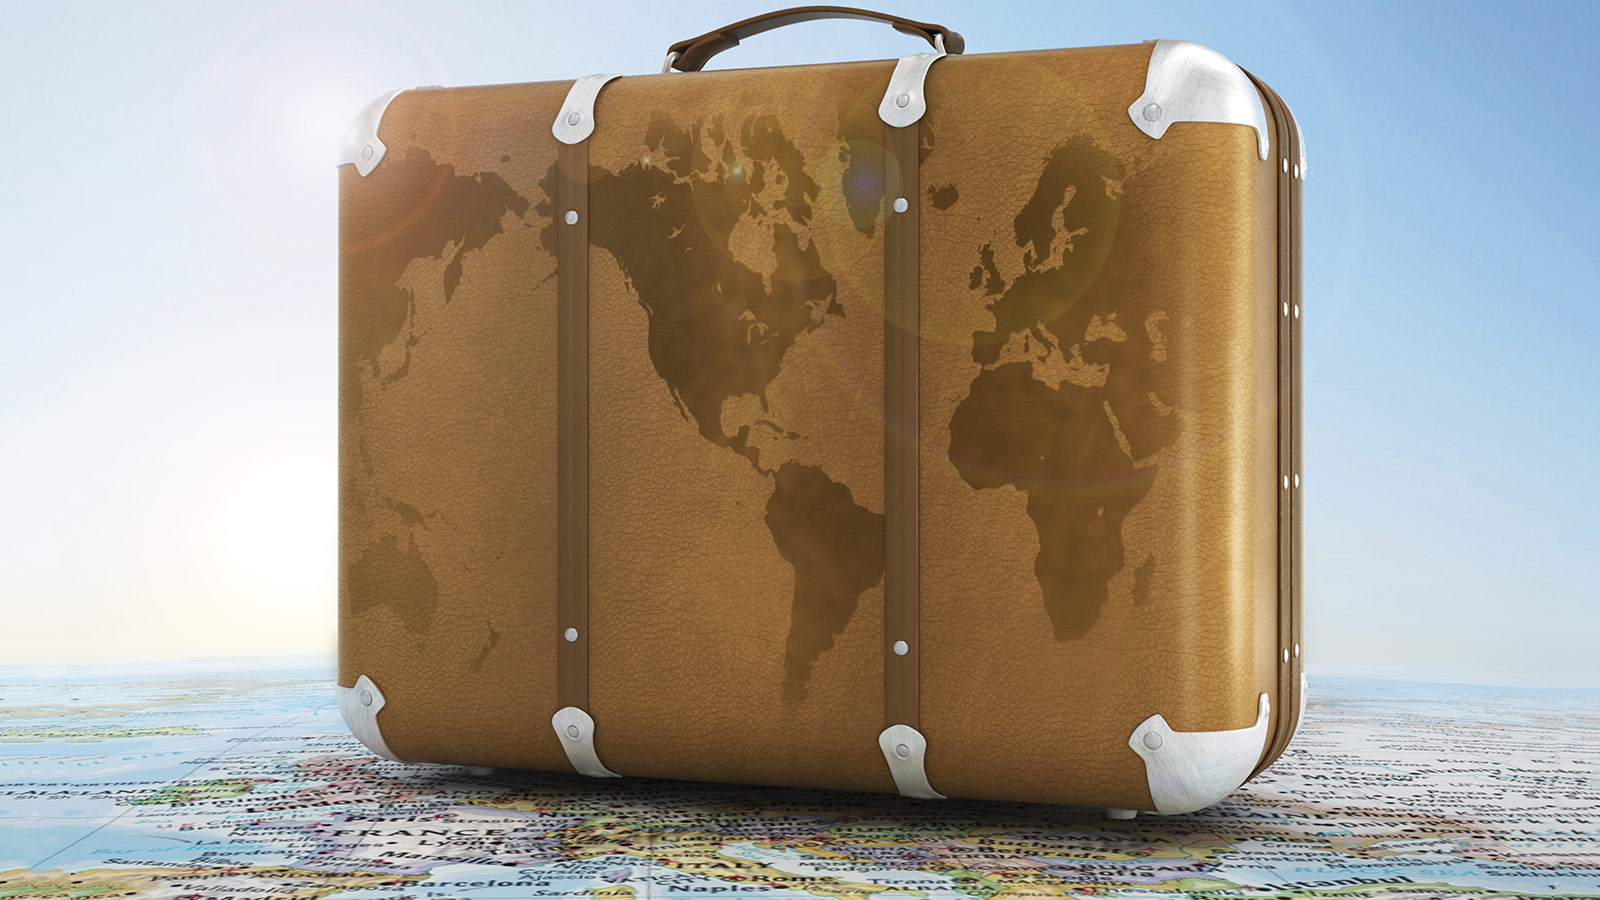 Suitcase on a map - 2015 - a year in travel